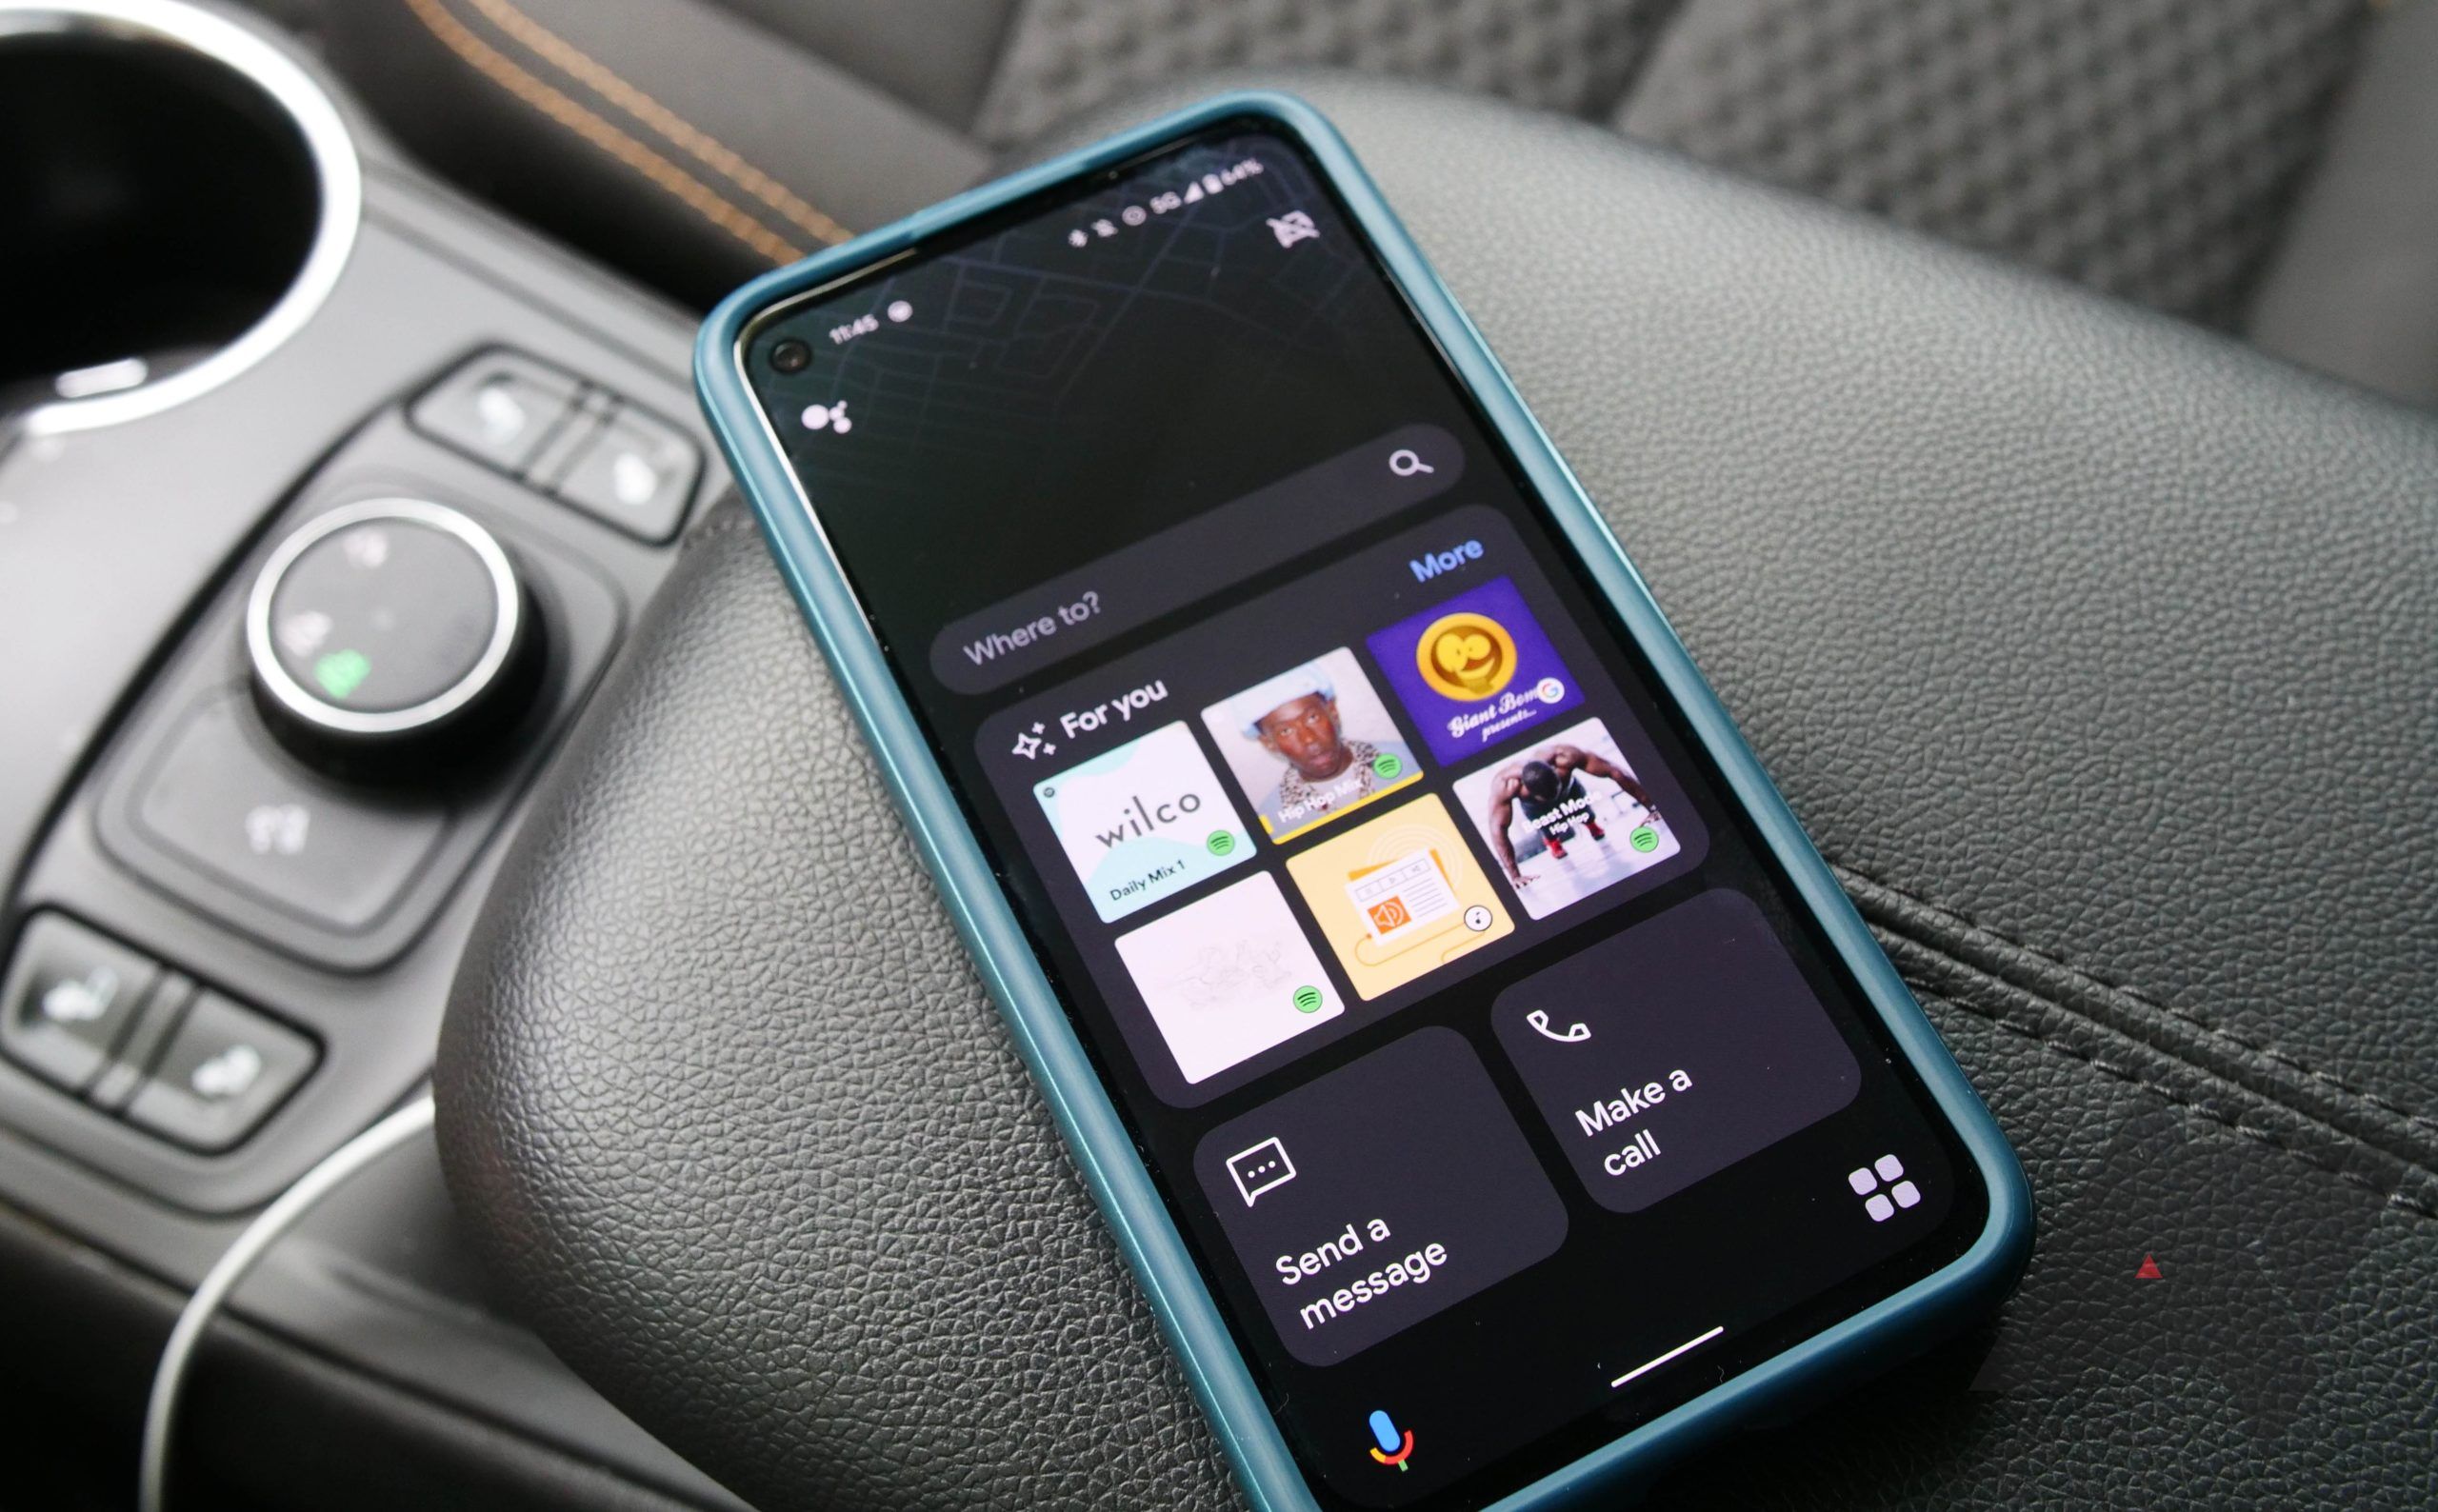 Google still hasn't given us a good in-car interface on Android phones